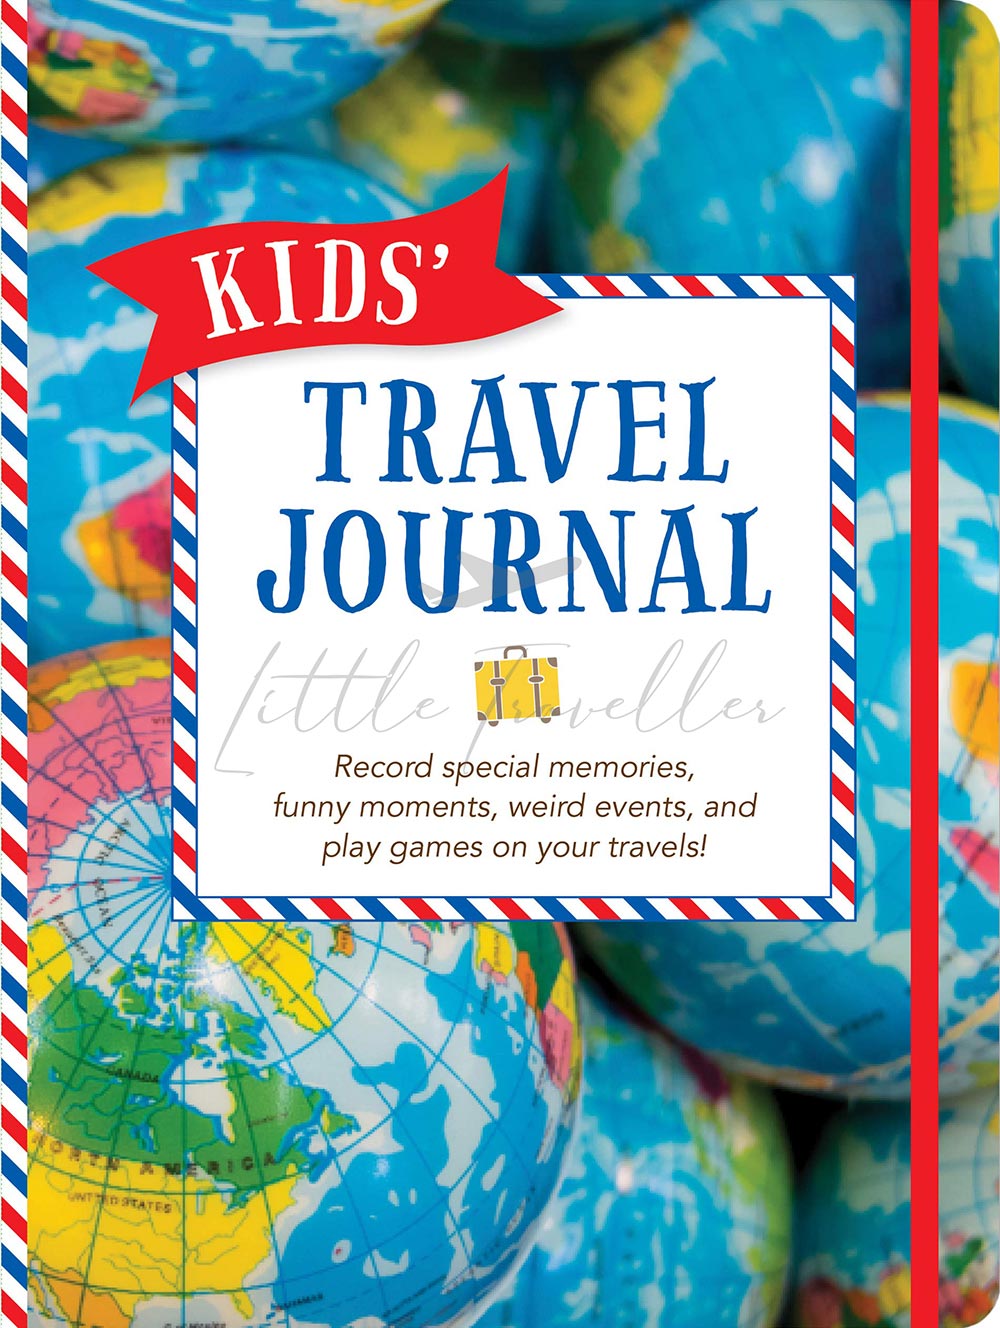 Kids' Travel Journal (Vacation Diary, Trip Notebook)